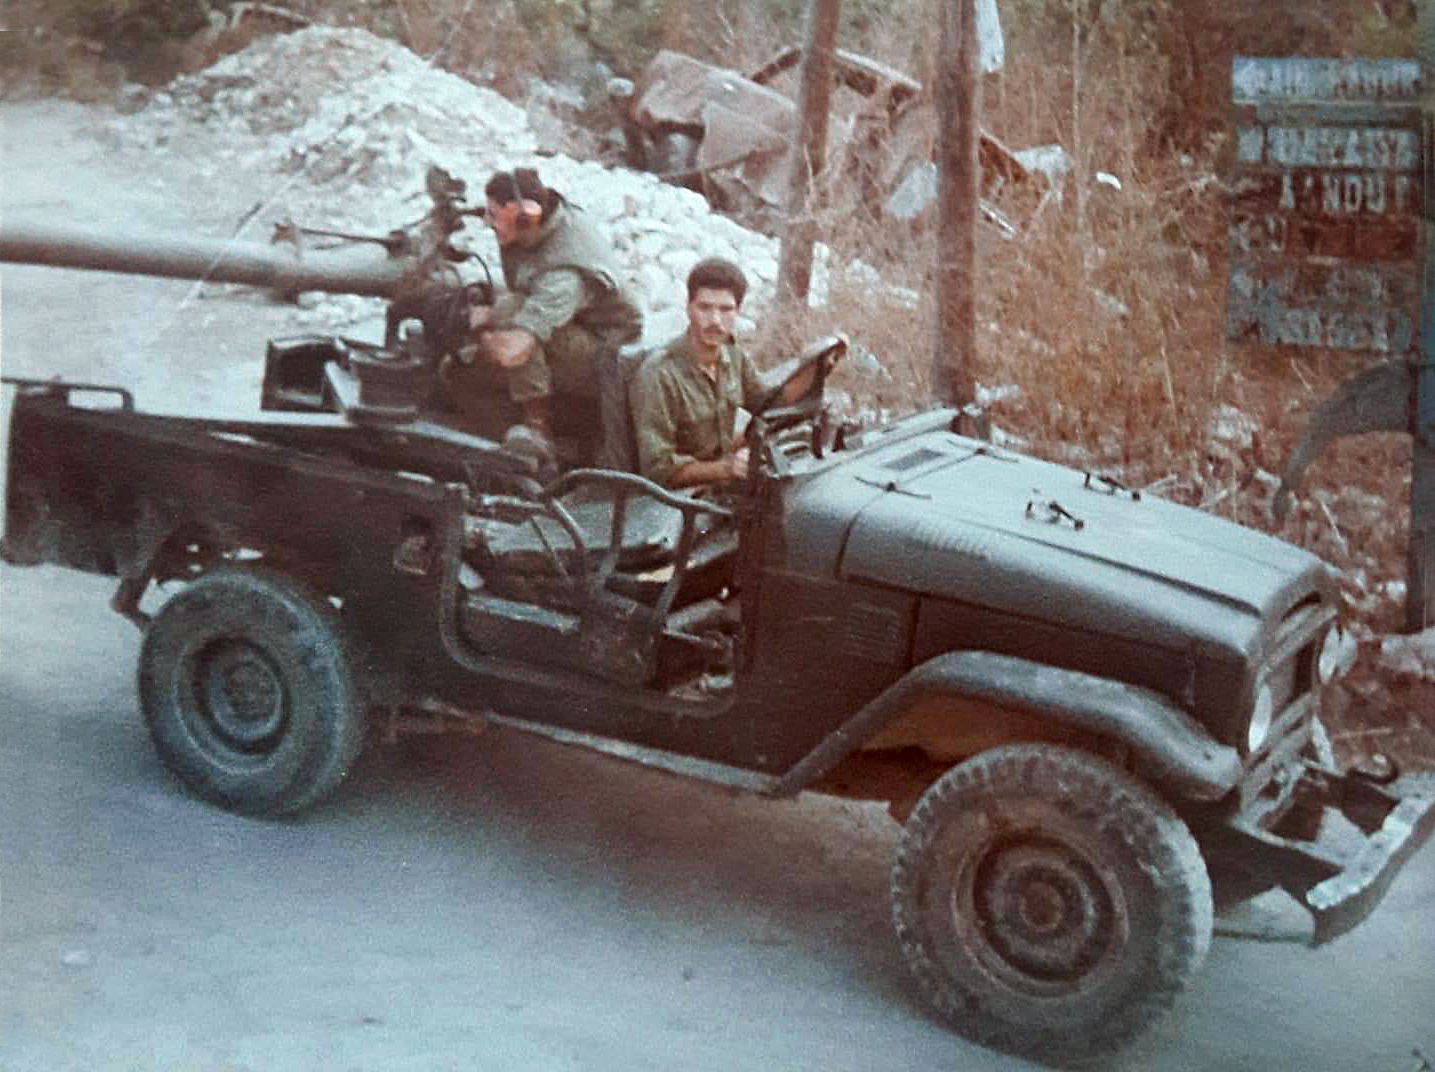 FJ43 of the lebanese falangists during the seige of the mountain in 1984